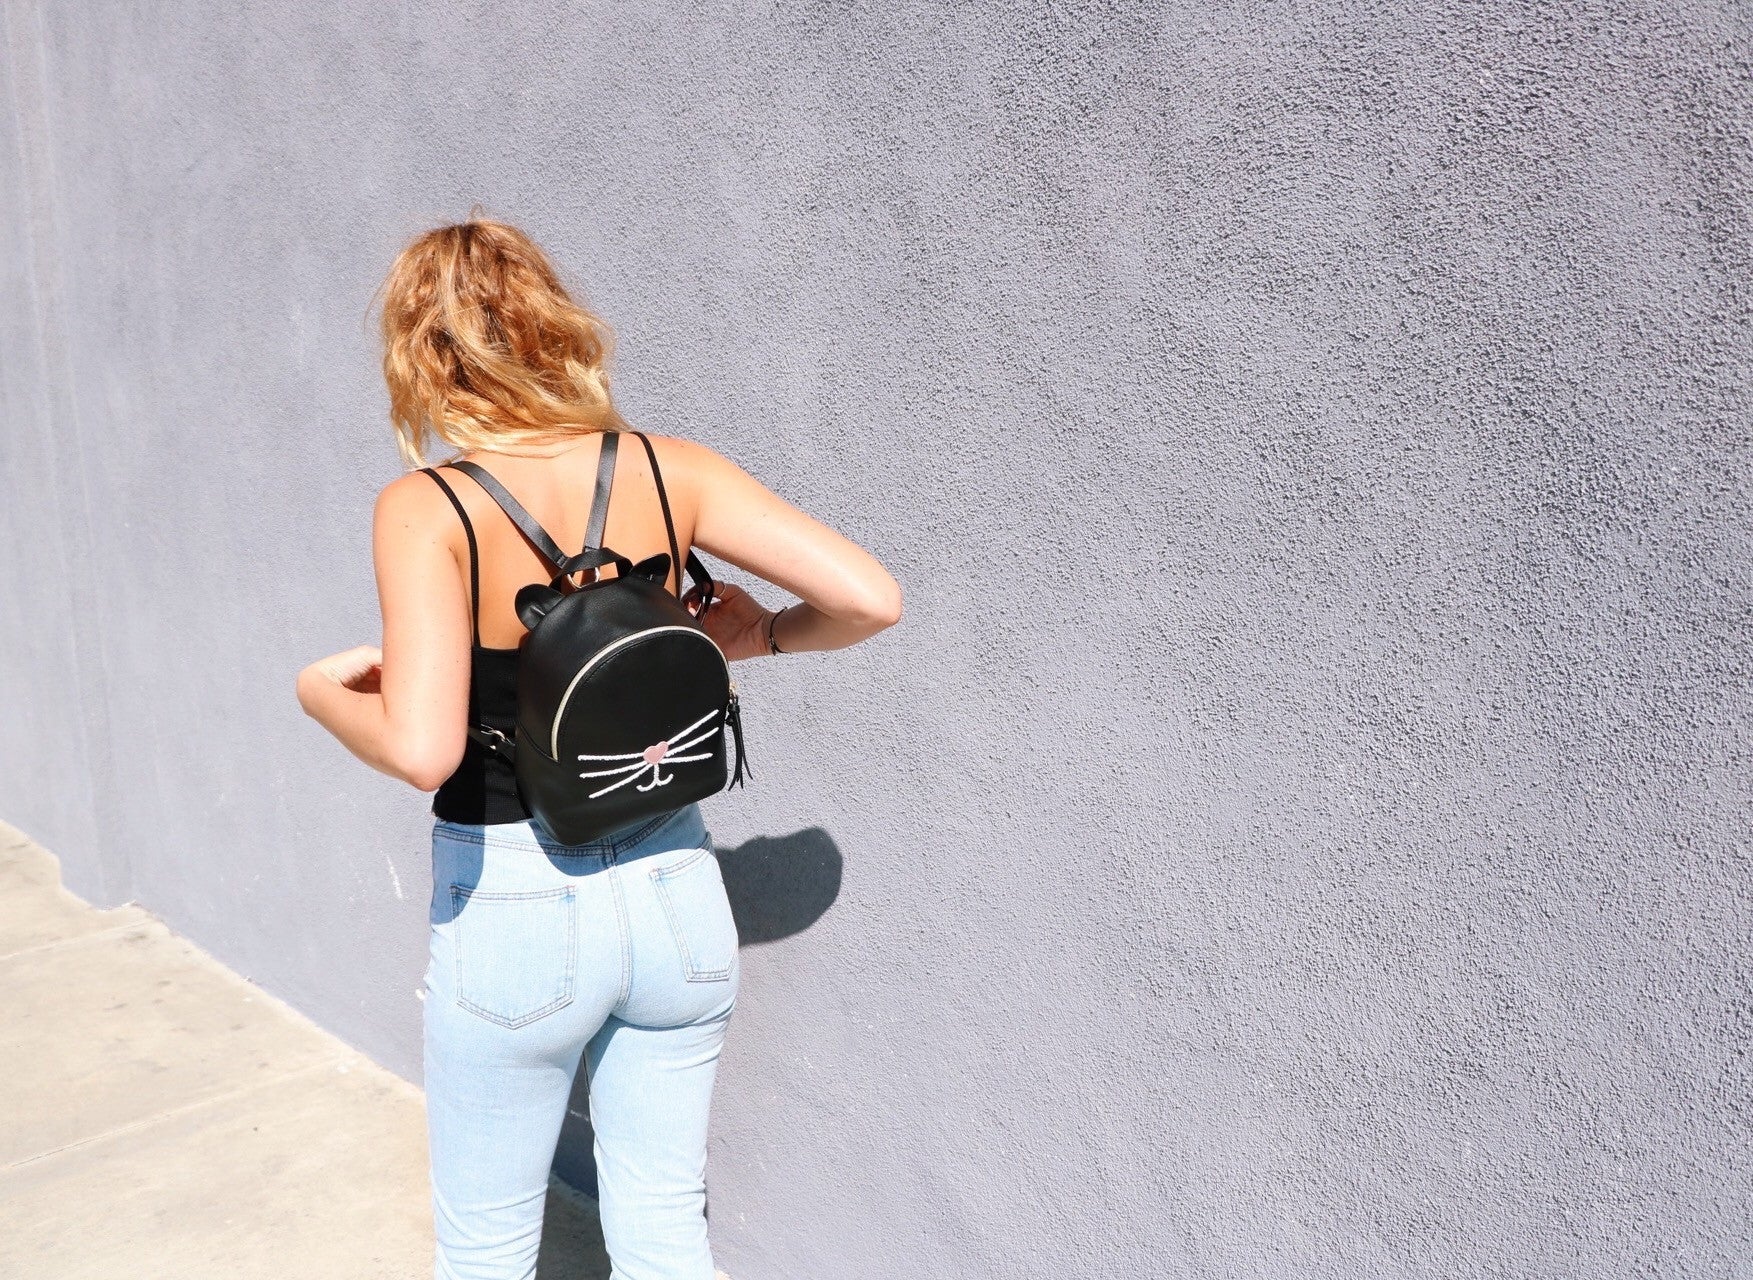 Check Meowt Backpack in Black